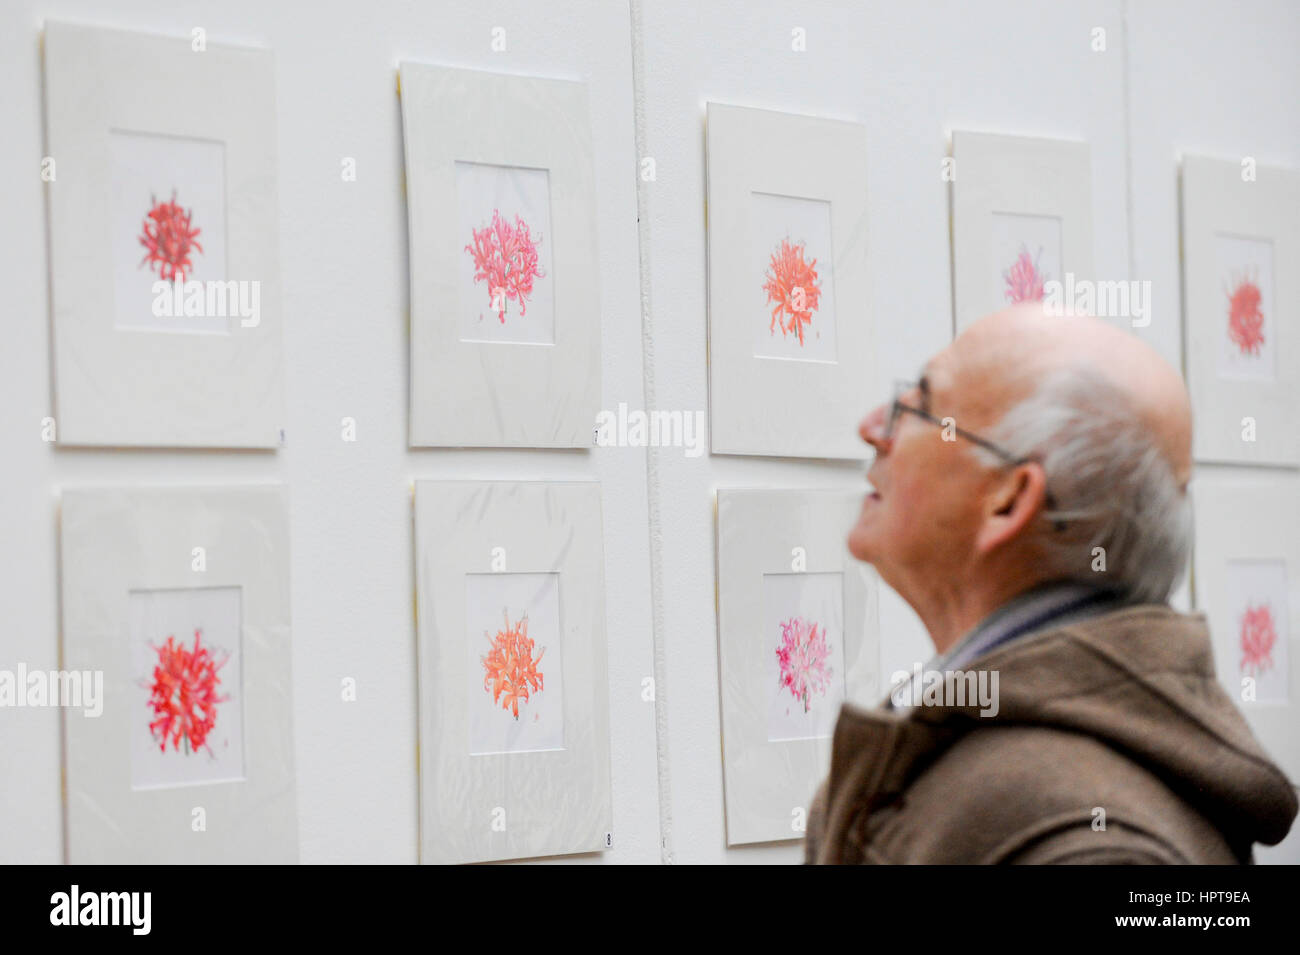 London, UK. 24th Feb, 2017. Members of the public view the work of some of the world's best botanical artists through a display of previously unseen work at the RHS London Botanical Art Show. Taking place this weekend, the show features artists from the UK and internationally including USA, Italy, Japan, New Zealand and South Korea. Credit: Stephen Chung/Alamy Live News Stock Photo